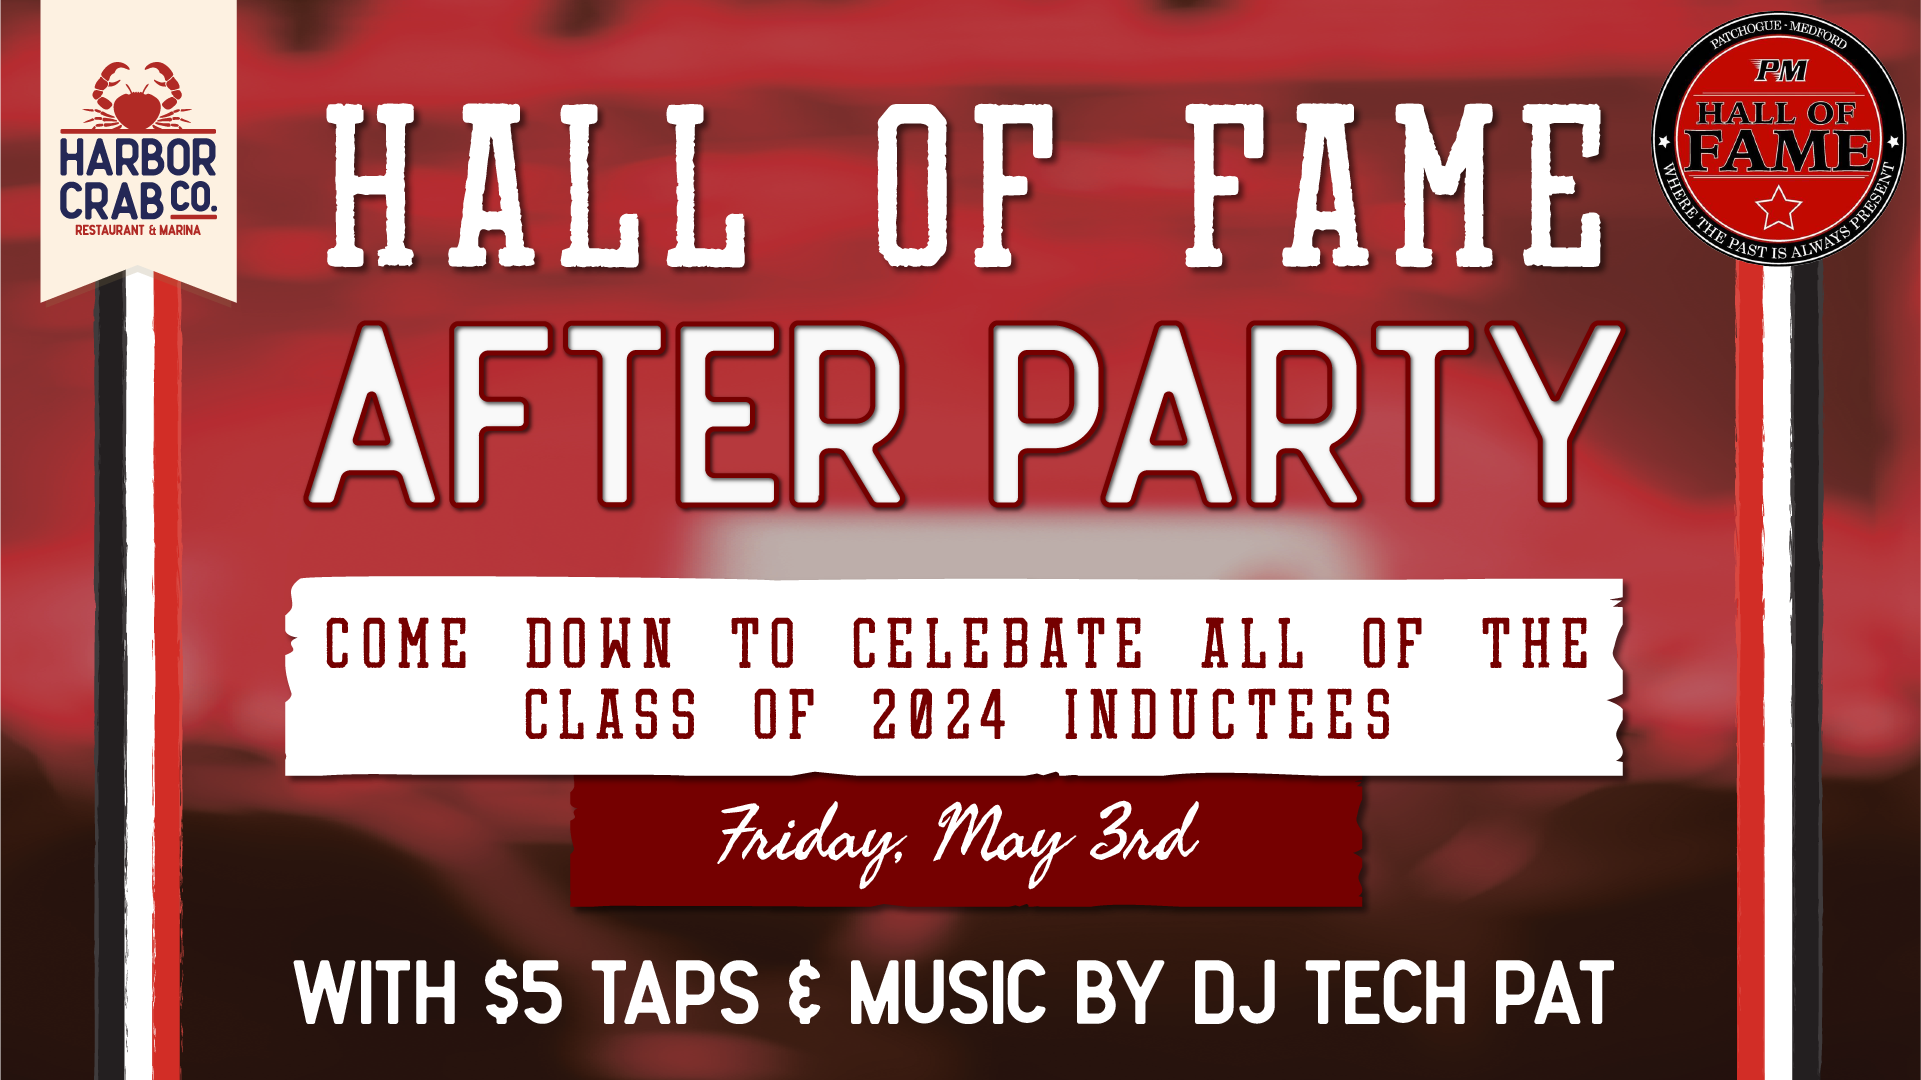 Hall of Fame After Party at Harbor Crab on May 3rd, starting at 7 PM, features $5 tap specials and music by DJ Tech Pat, honoring the Class of 2024 inductees.